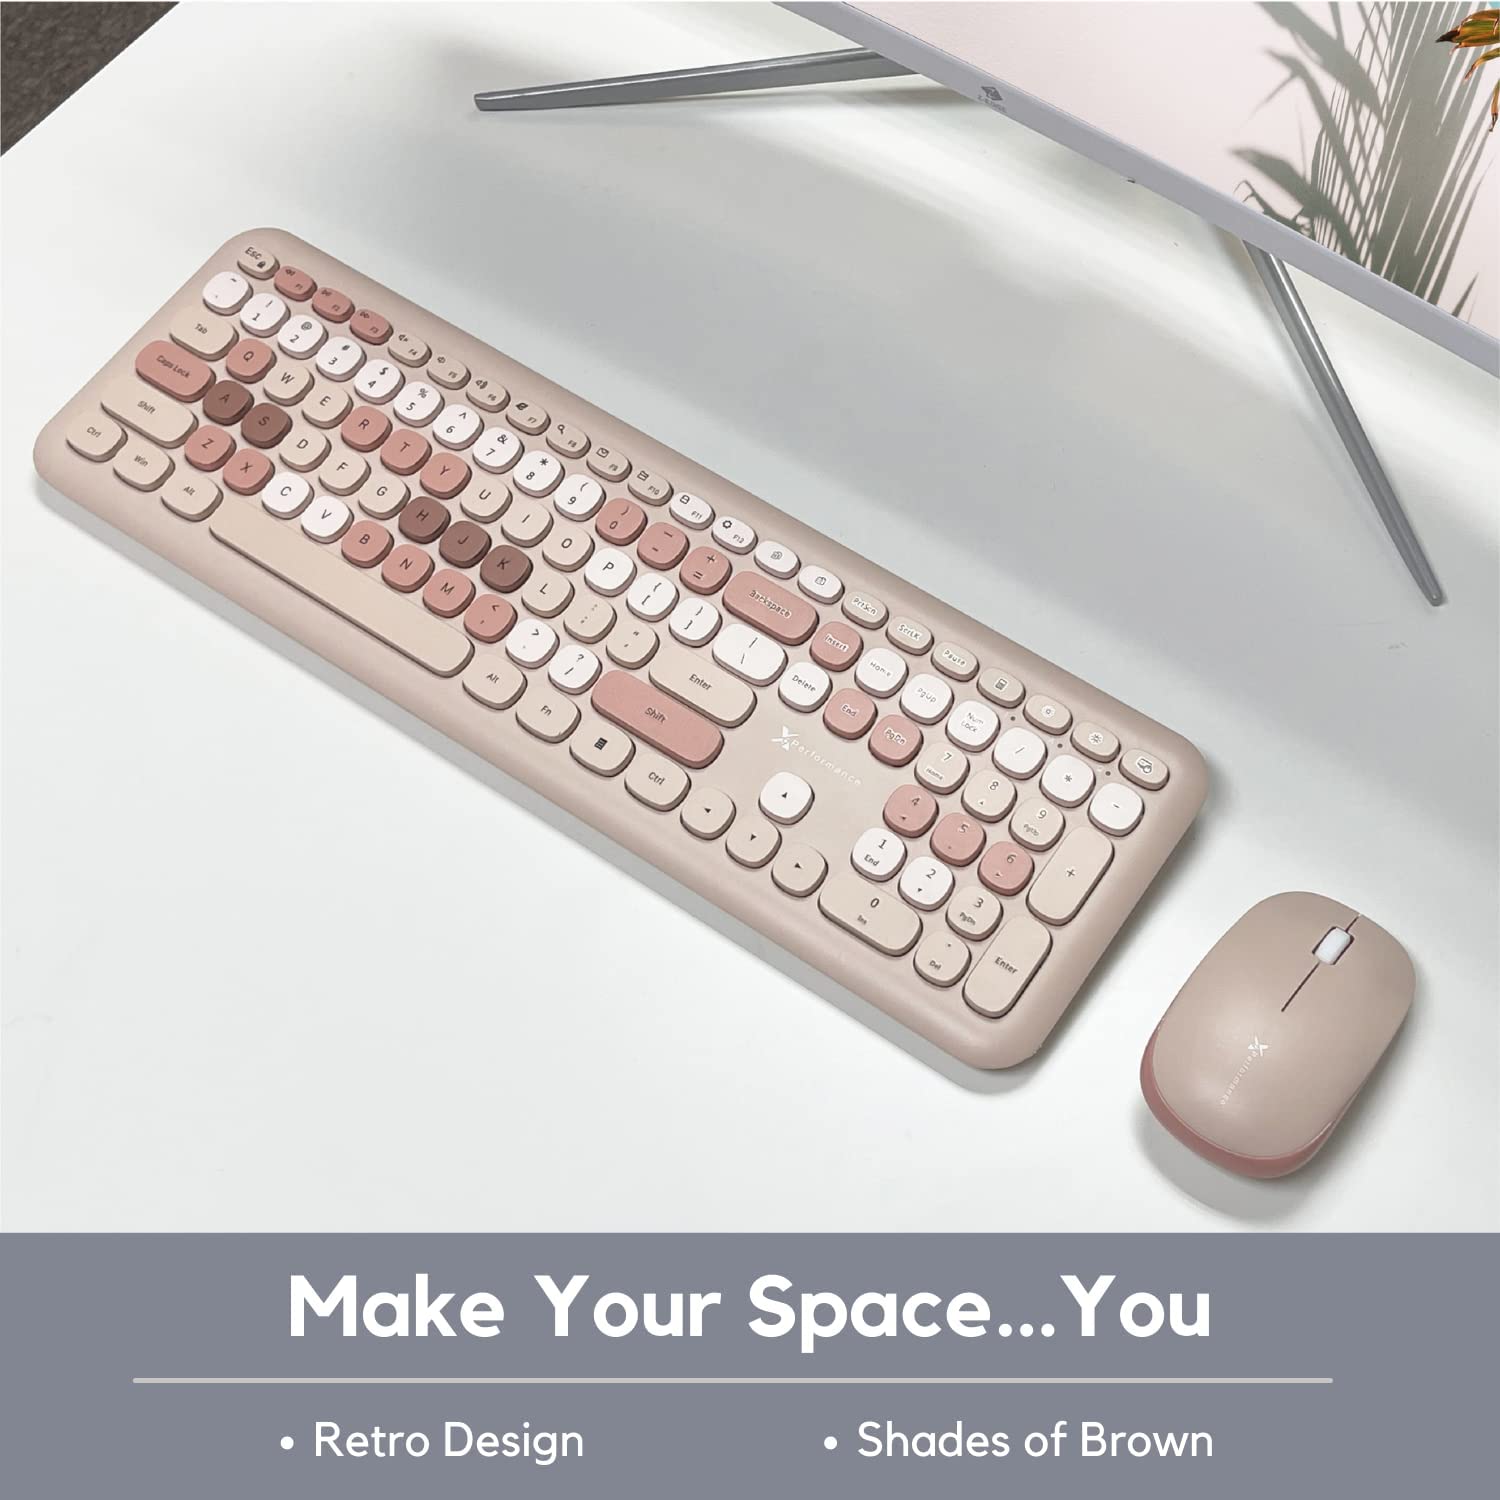 X9 Performance Colorful Keyboard and Mouse Combo - 2.4G Wireless Connectivity - Transform Your Space with a Cute Wireless Keyboard and Mouse Set (110 Keys and 18 Shortcuts) - for PC and Chrome - Brown